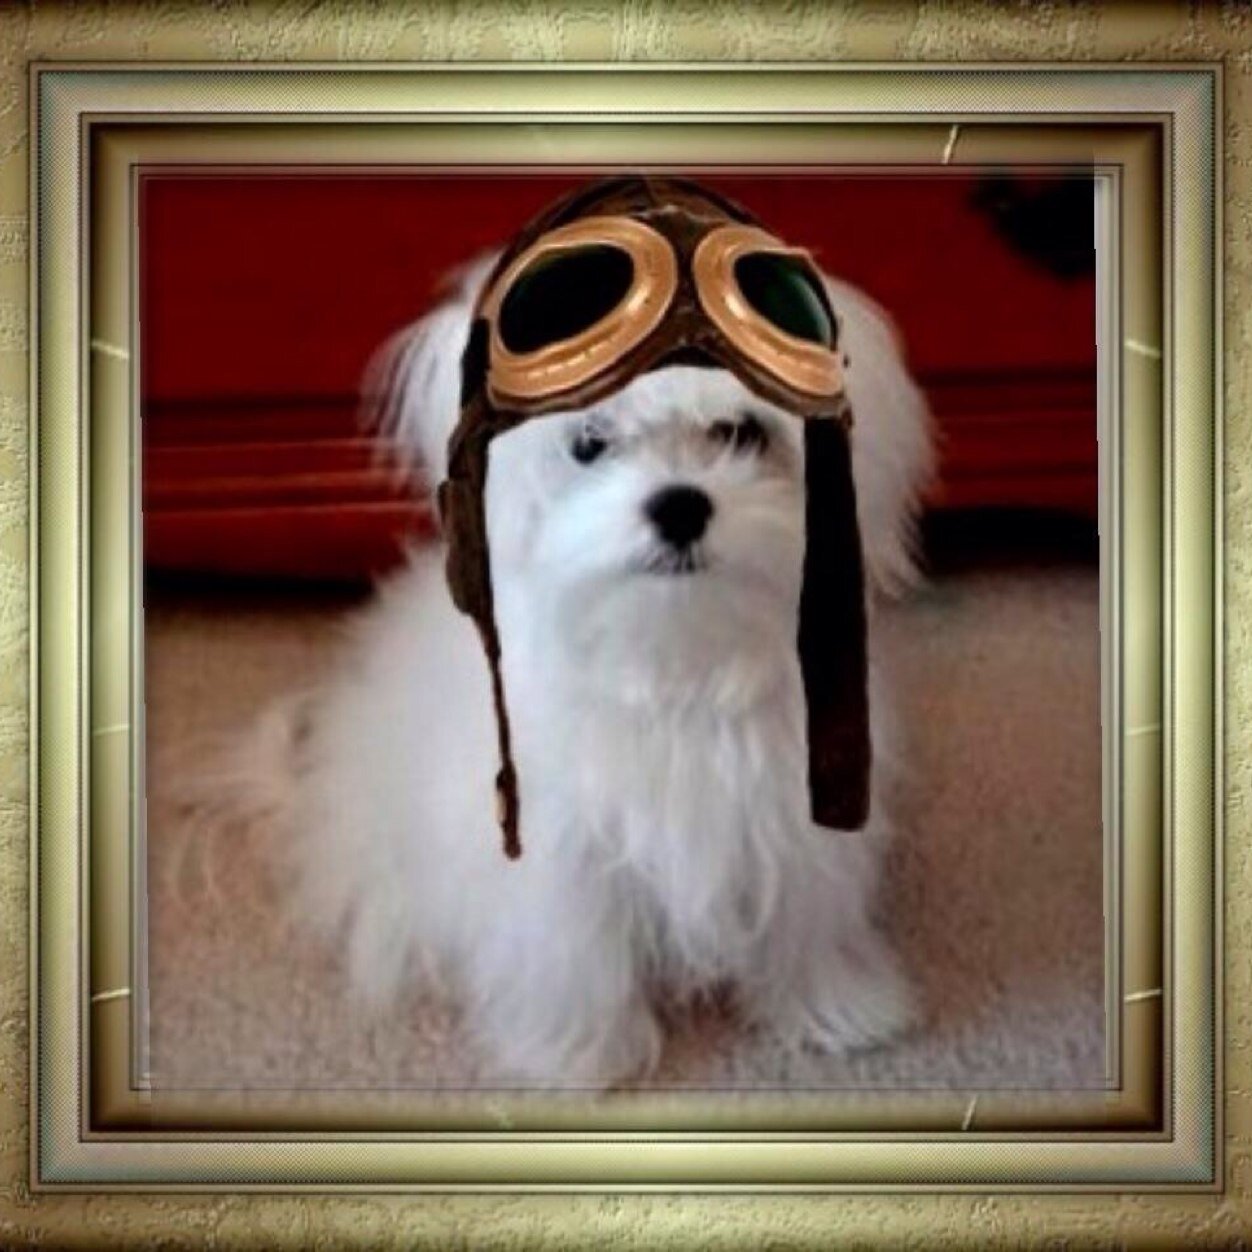 MALTESE PRINCE, Nature's Recipe Lover, BB Gang, #TheAviators, #ZSHQ, 1/2 Canadian kid, former West LA/CA resident, still in denial that we now live in Houston!